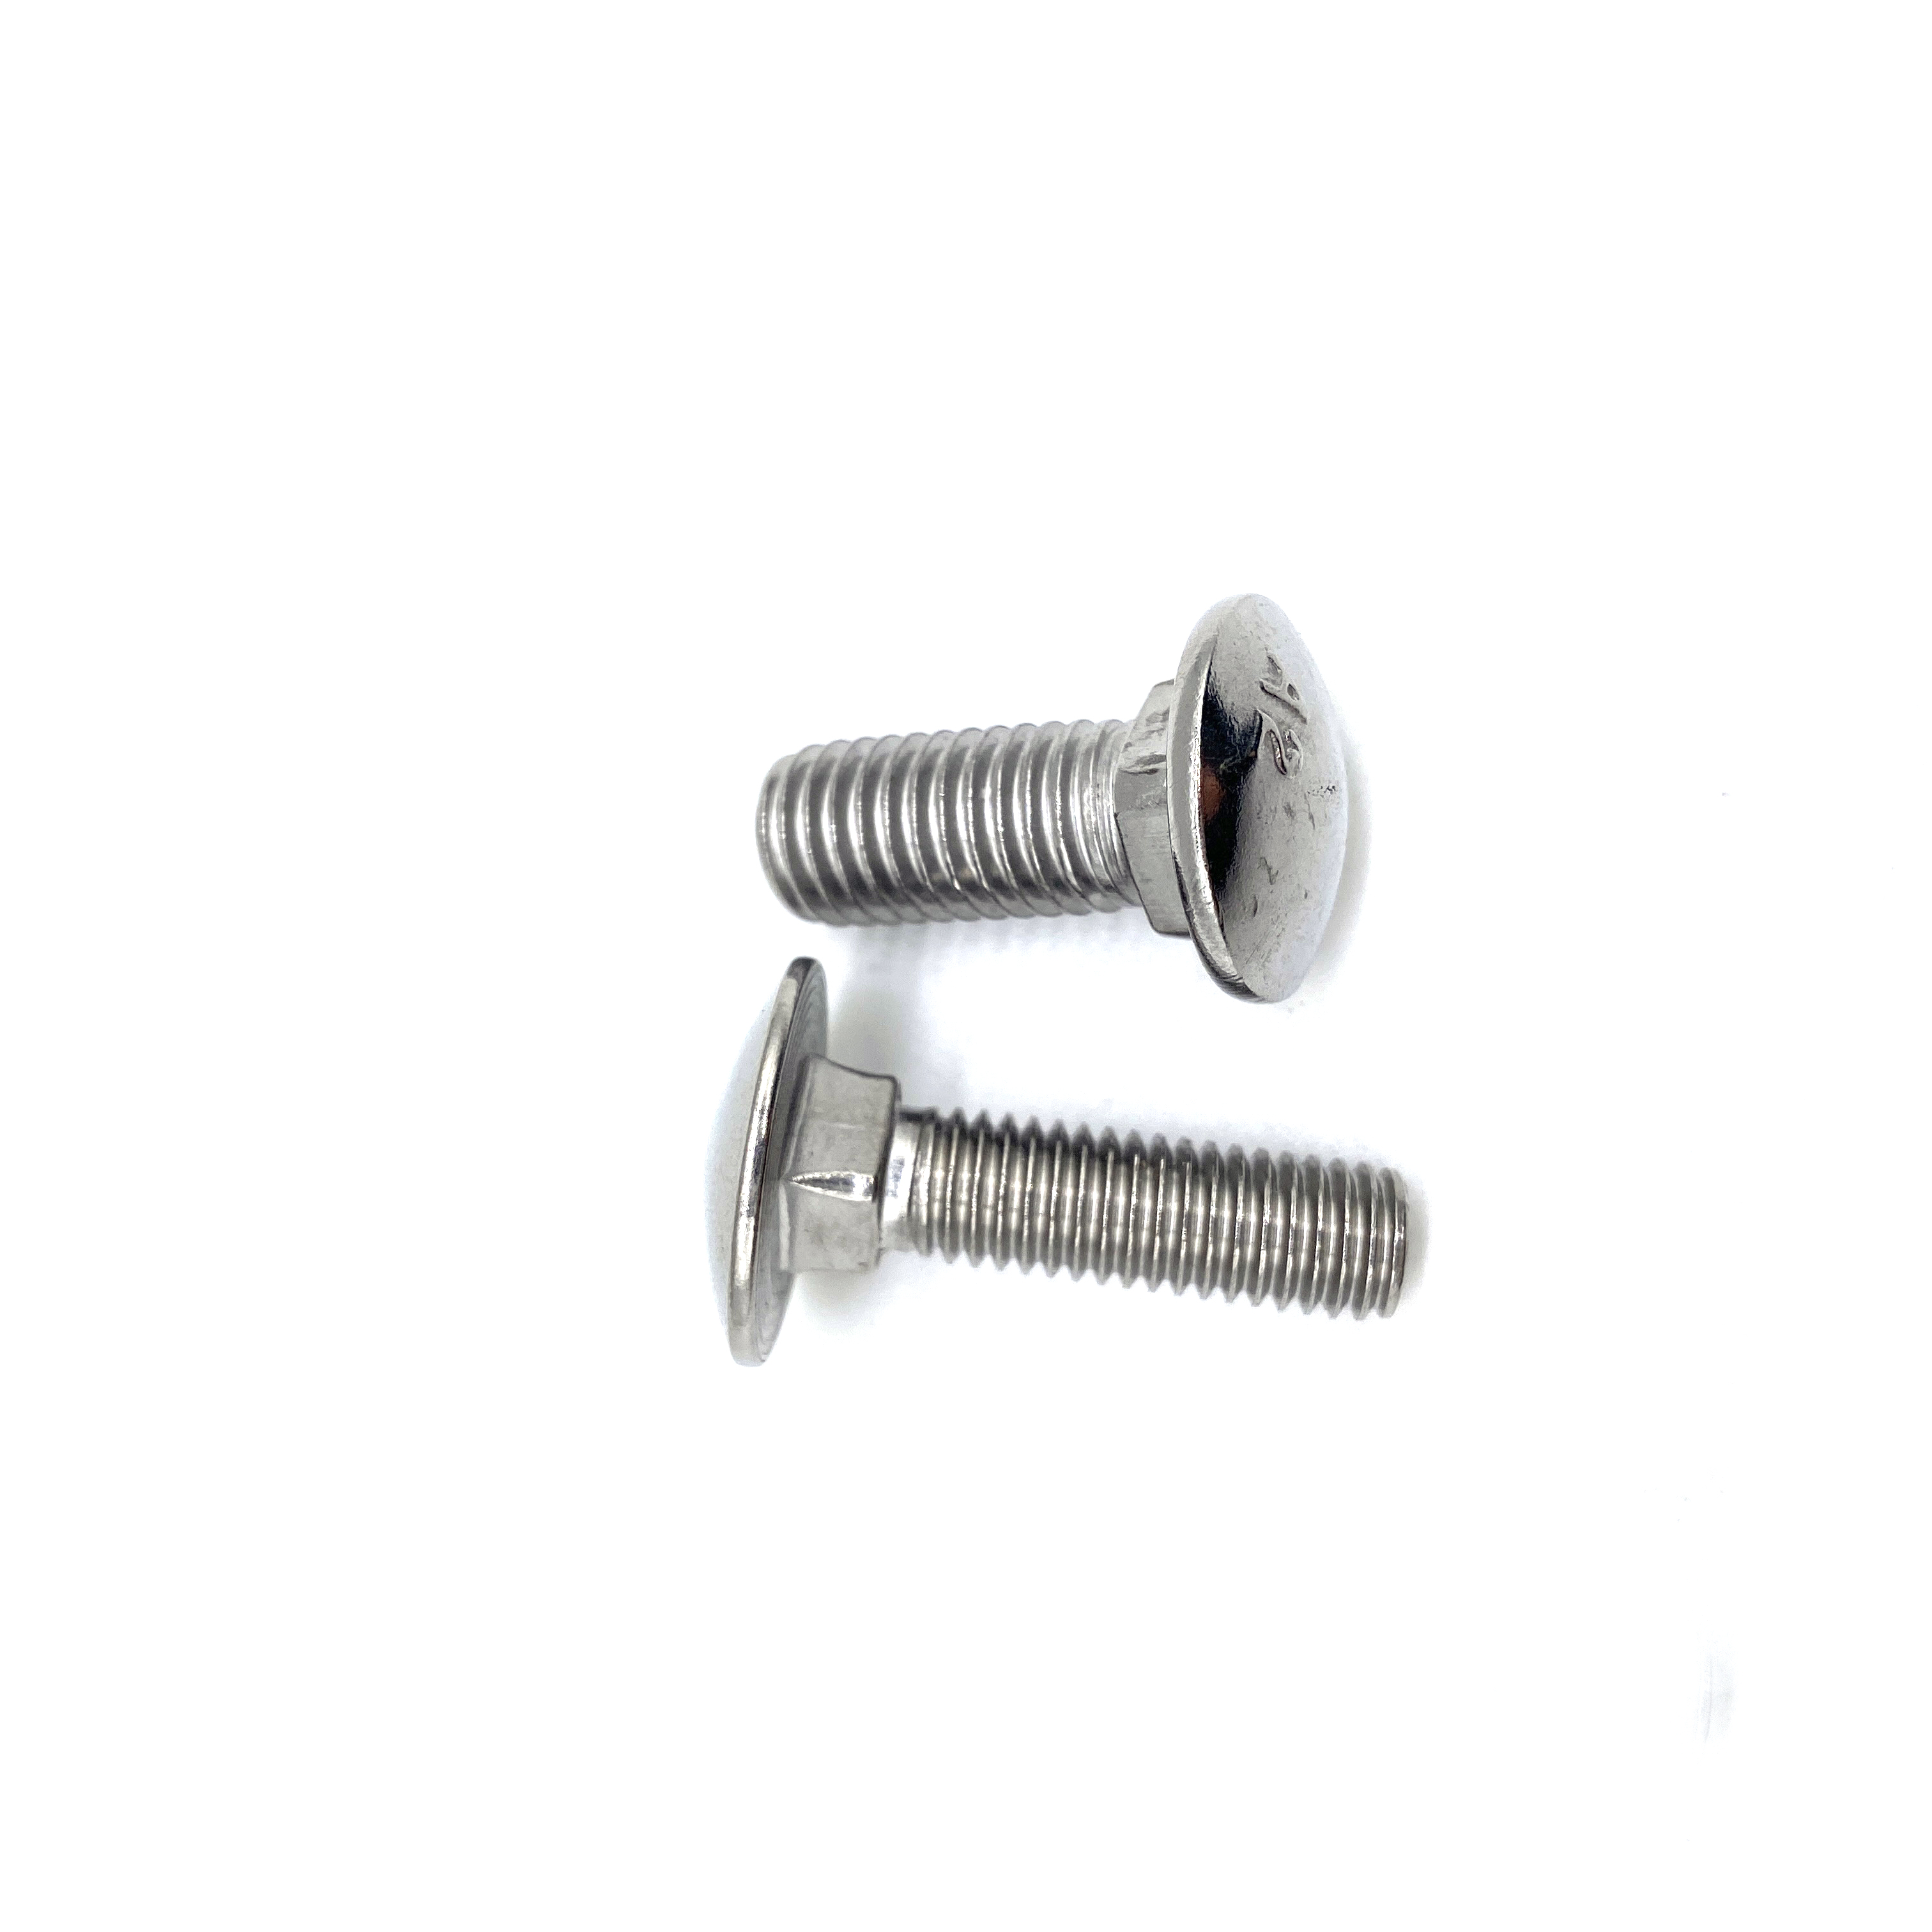 DIN603 A4-70 A4-80 Stainless Steel 314 316 M6 M12Carriage Bolt